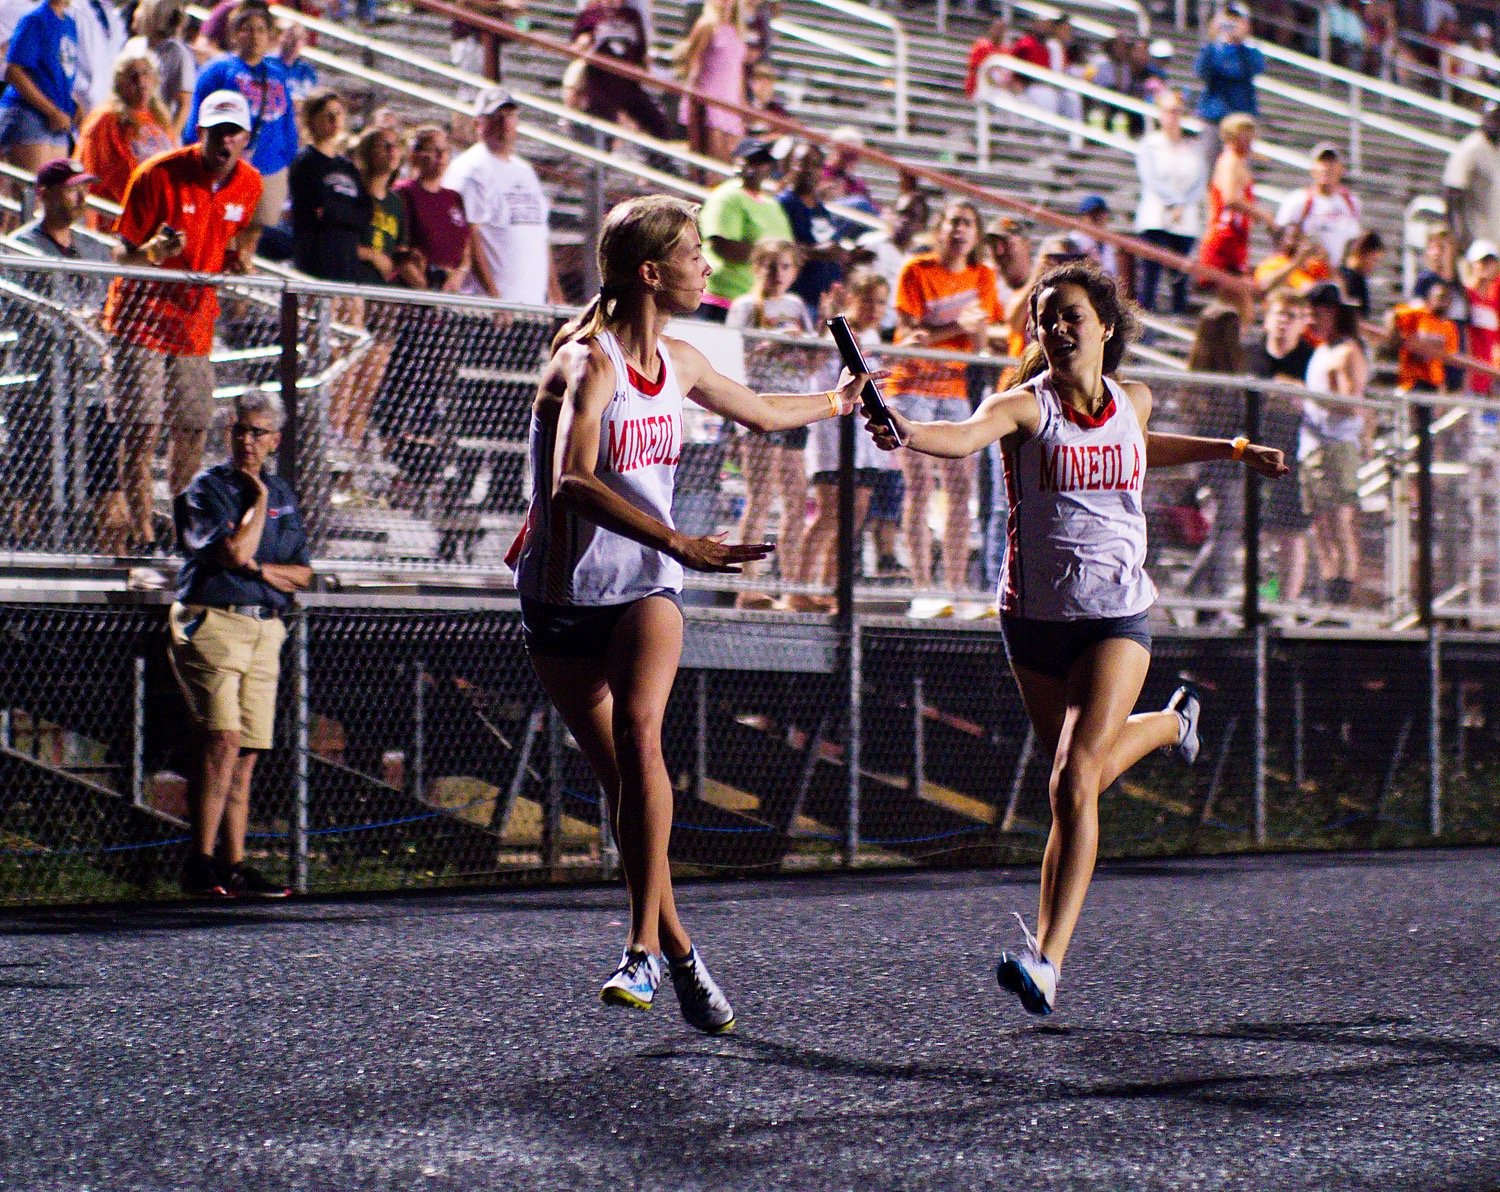 Kozbie Riley hands the baton off to Olivia Hughes for the second leg of Mineola's 4x400m relay final. [see more sprinters, soarers]